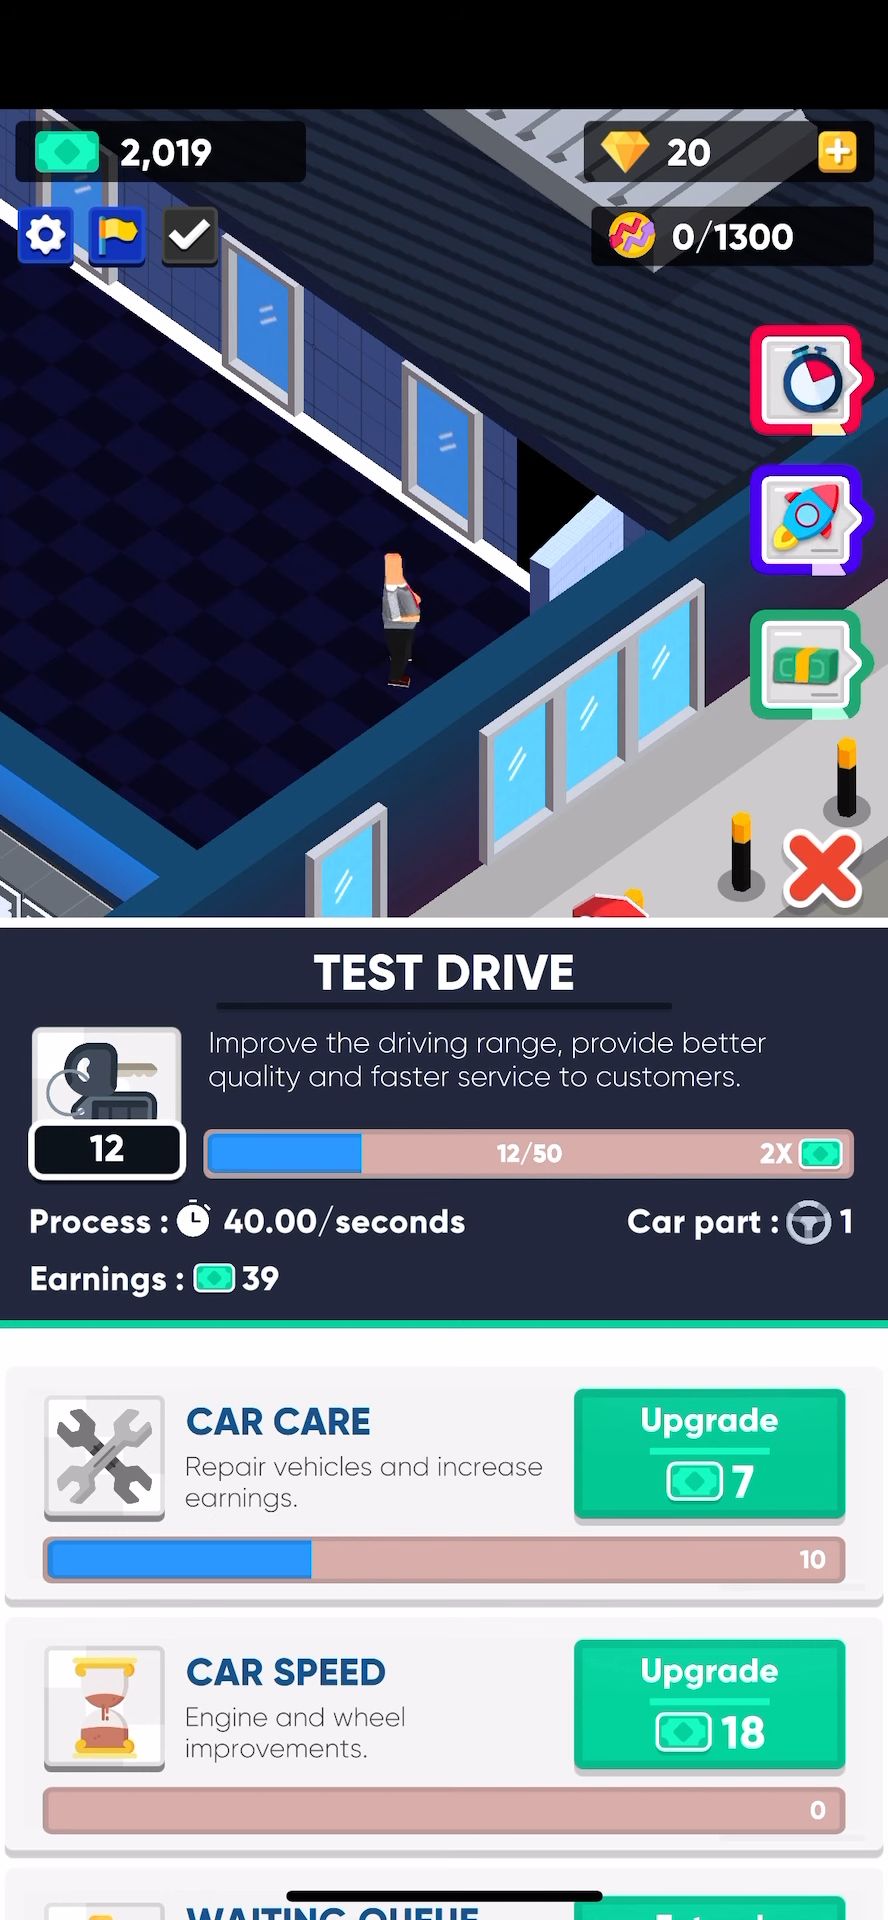 Car Shop Tycoon : Auto Dealer for Android